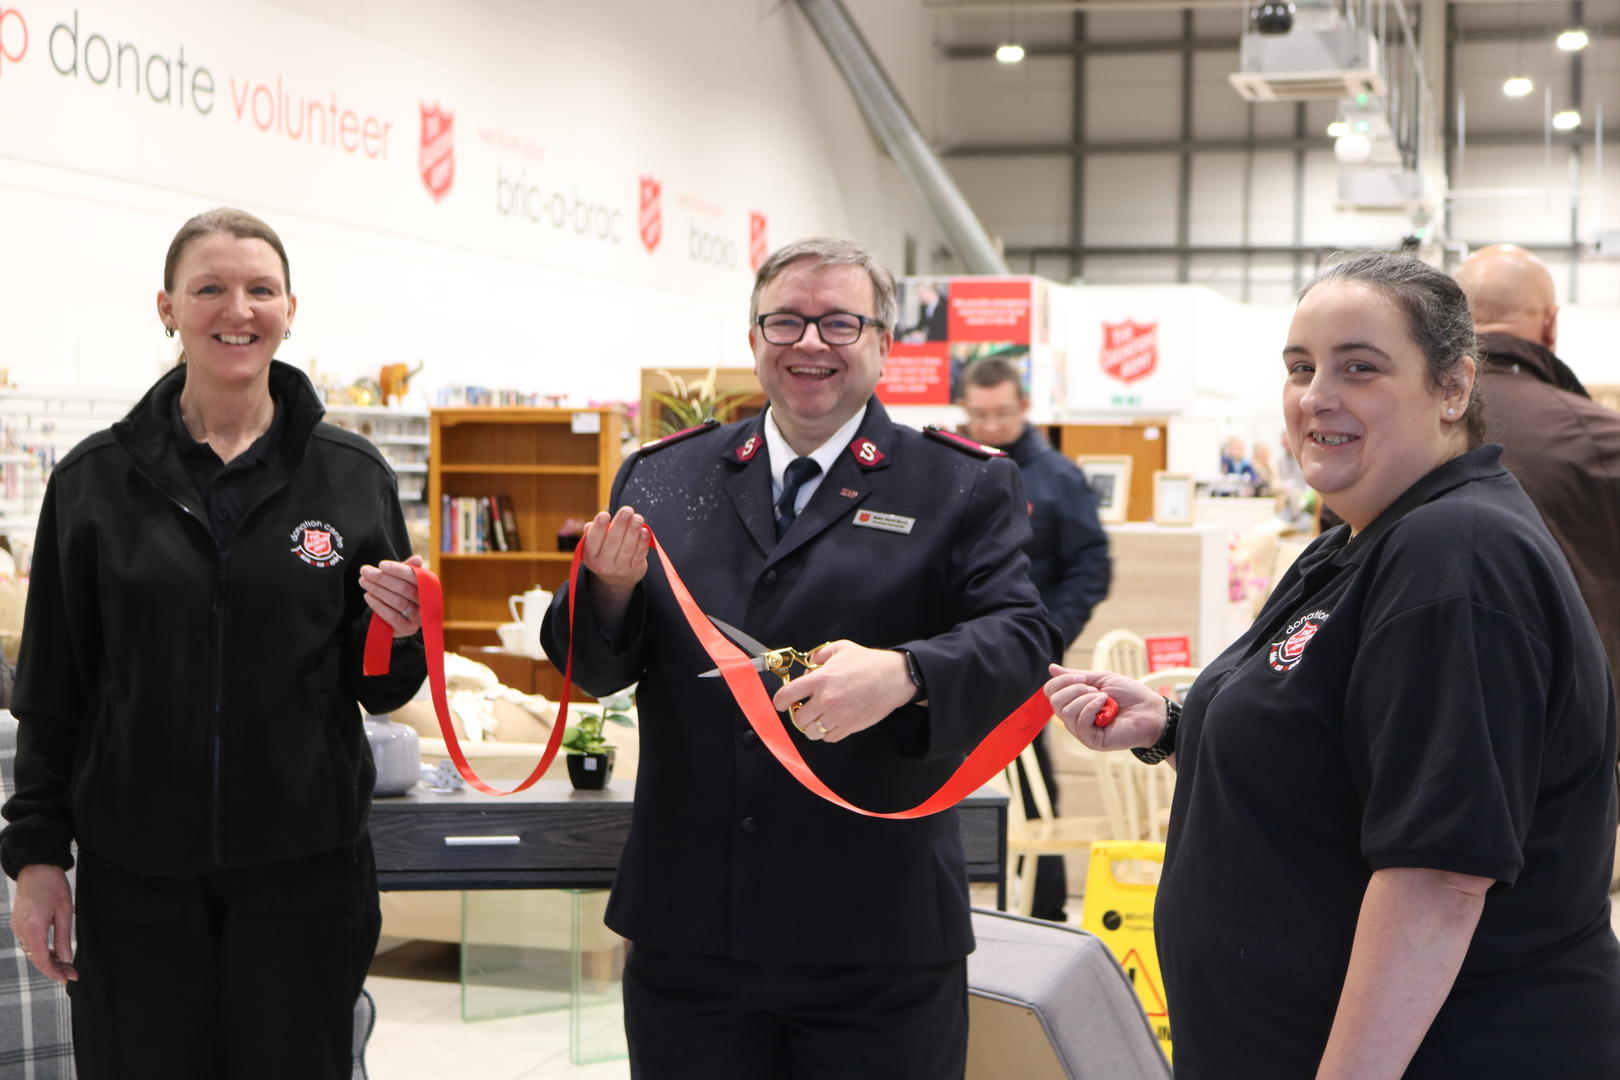 Two other Salvation Army staff members hold a ribbon whilst Sunderland's Divisional Commander cuts it to mark the opening of a new donation centre